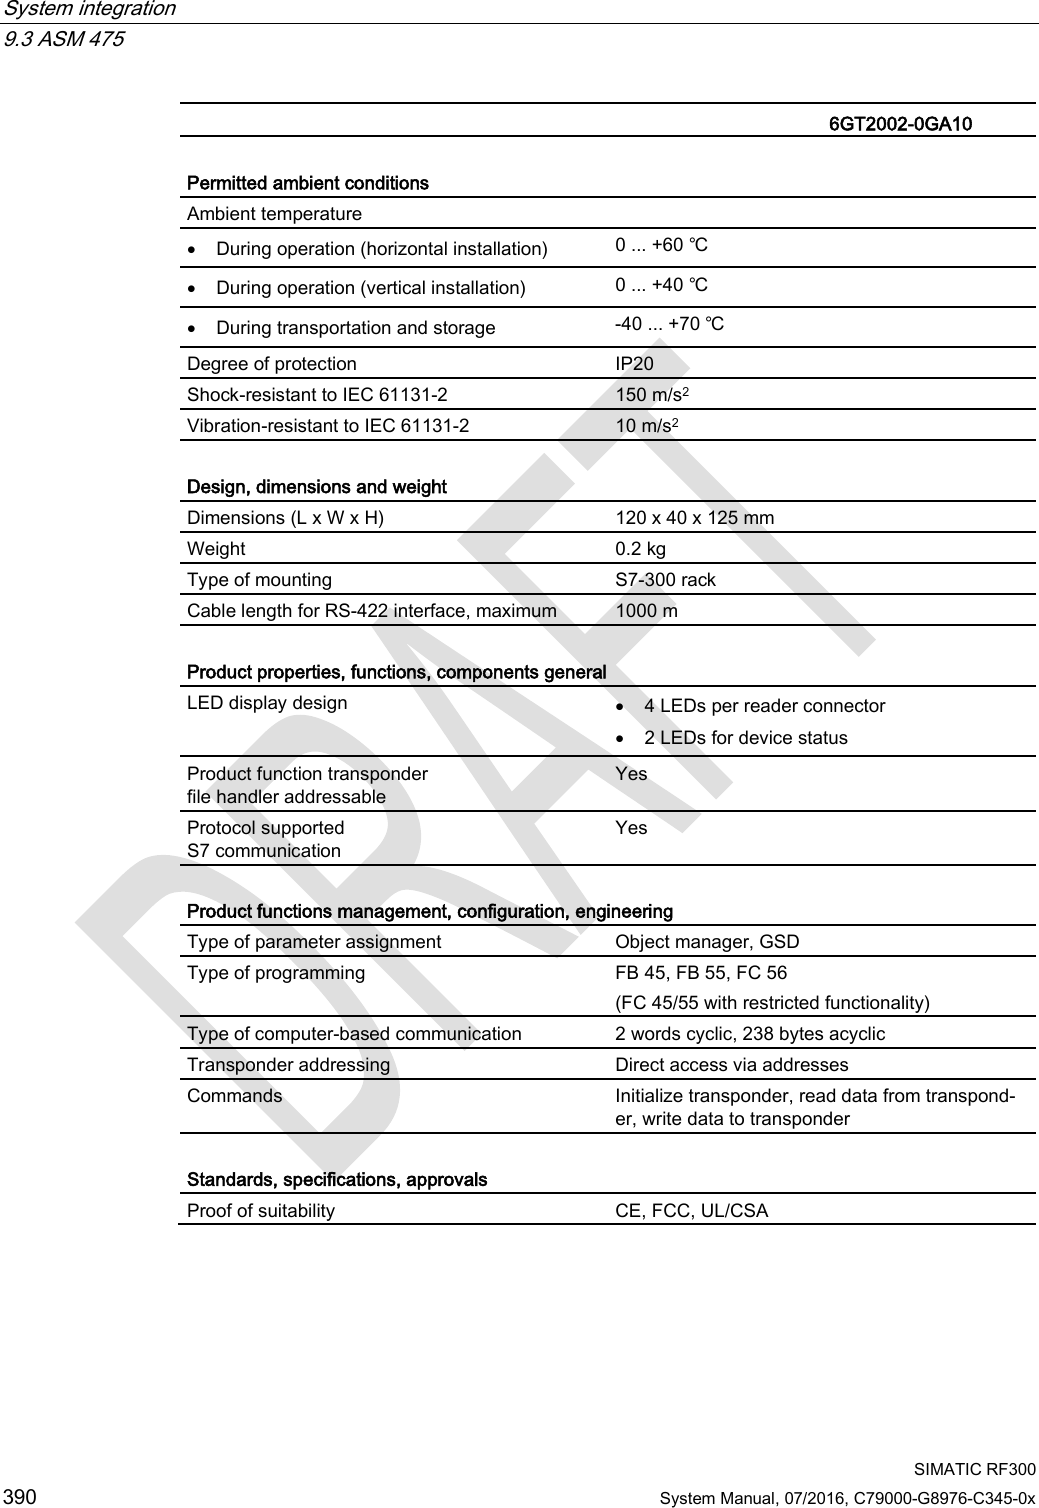 System integration   9.3 ASM 475  SIMATIC RF300 390 System Manual, 07/2016, C79000-G8976-C345-0x   6GT2002-0GA10  Permitted ambient conditions Ambient temperature  • During operation (horizontal installation) 0 ... +60 ℃ • During operation (vertical installation) 0 ... +40 ℃ • During transportation and storage -40 ... +70 ℃ Degree of protection IP20 Shock-resistant to IEC 61131-2  150 m/s2 Vibration-resistant to IEC 61131-2  10 m/s2  Design, dimensions and weight  Dimensions (L x W x H) 120 x 40 x 125 mm Weight 0.2 kg Type of mounting S7-300 rack Cable length for RS-422 interface, maximum 1000 m  Product properties, functions, components general  LED display design • 4 LEDs per reader connector • 2 LEDs for device status Product function transponder file handler addressable Yes Protocol supported  S7 communication Yes  Product functions management, configuration, engineering  Type of parameter assignment Object manager, GSD Type of programming FB 45, FB 55, FC 56 (FC 45/55 with restricted functionality) Type of computer-based communication 2 words cyclic, 238 bytes acyclic Transponder addressing Direct access via addresses Commands Initialize transponder, read data from transpond-er, write data to transponder  Standards, specifications, approvals Proof of suitability CE, FCC, UL/CSA  